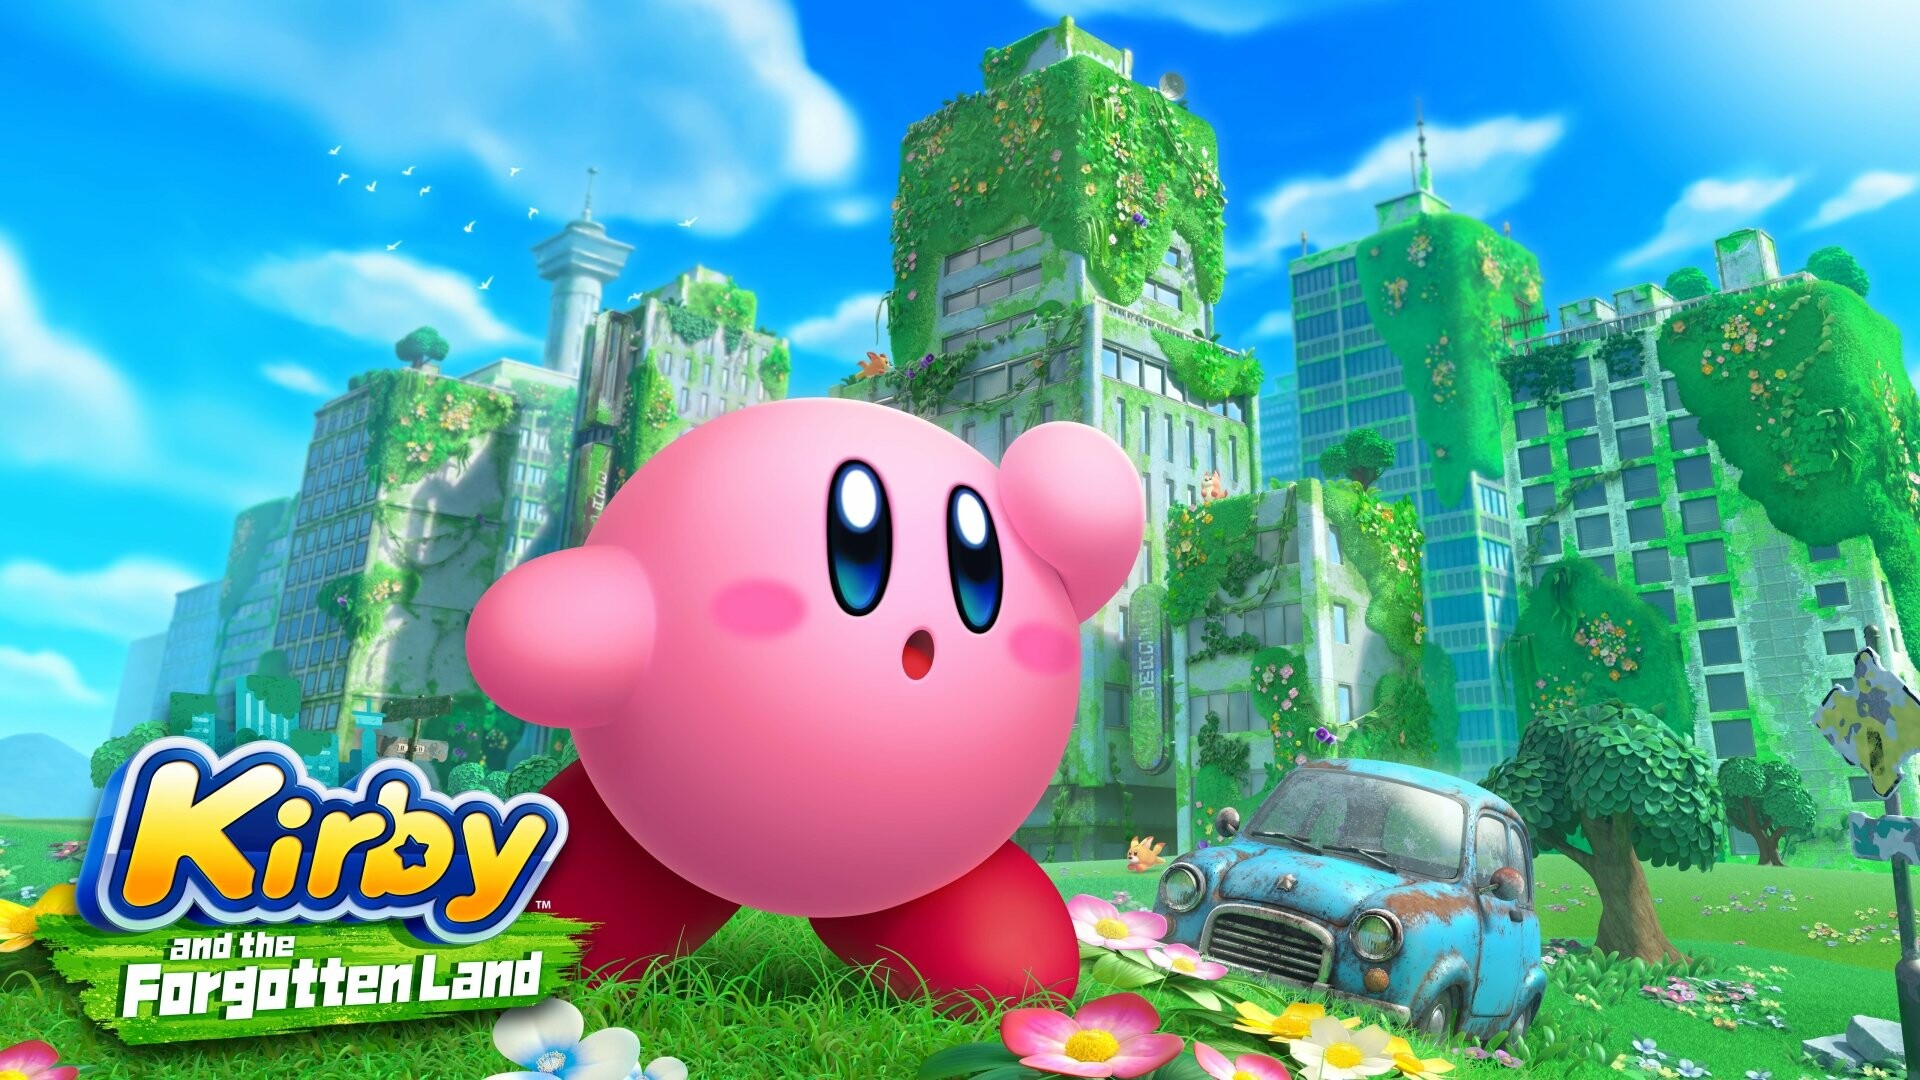 Kirby and the Forgotten Land, Vibrant landscapes, Whimsical adventures, Nintendo magic, 1920x1080 Full HD Desktop